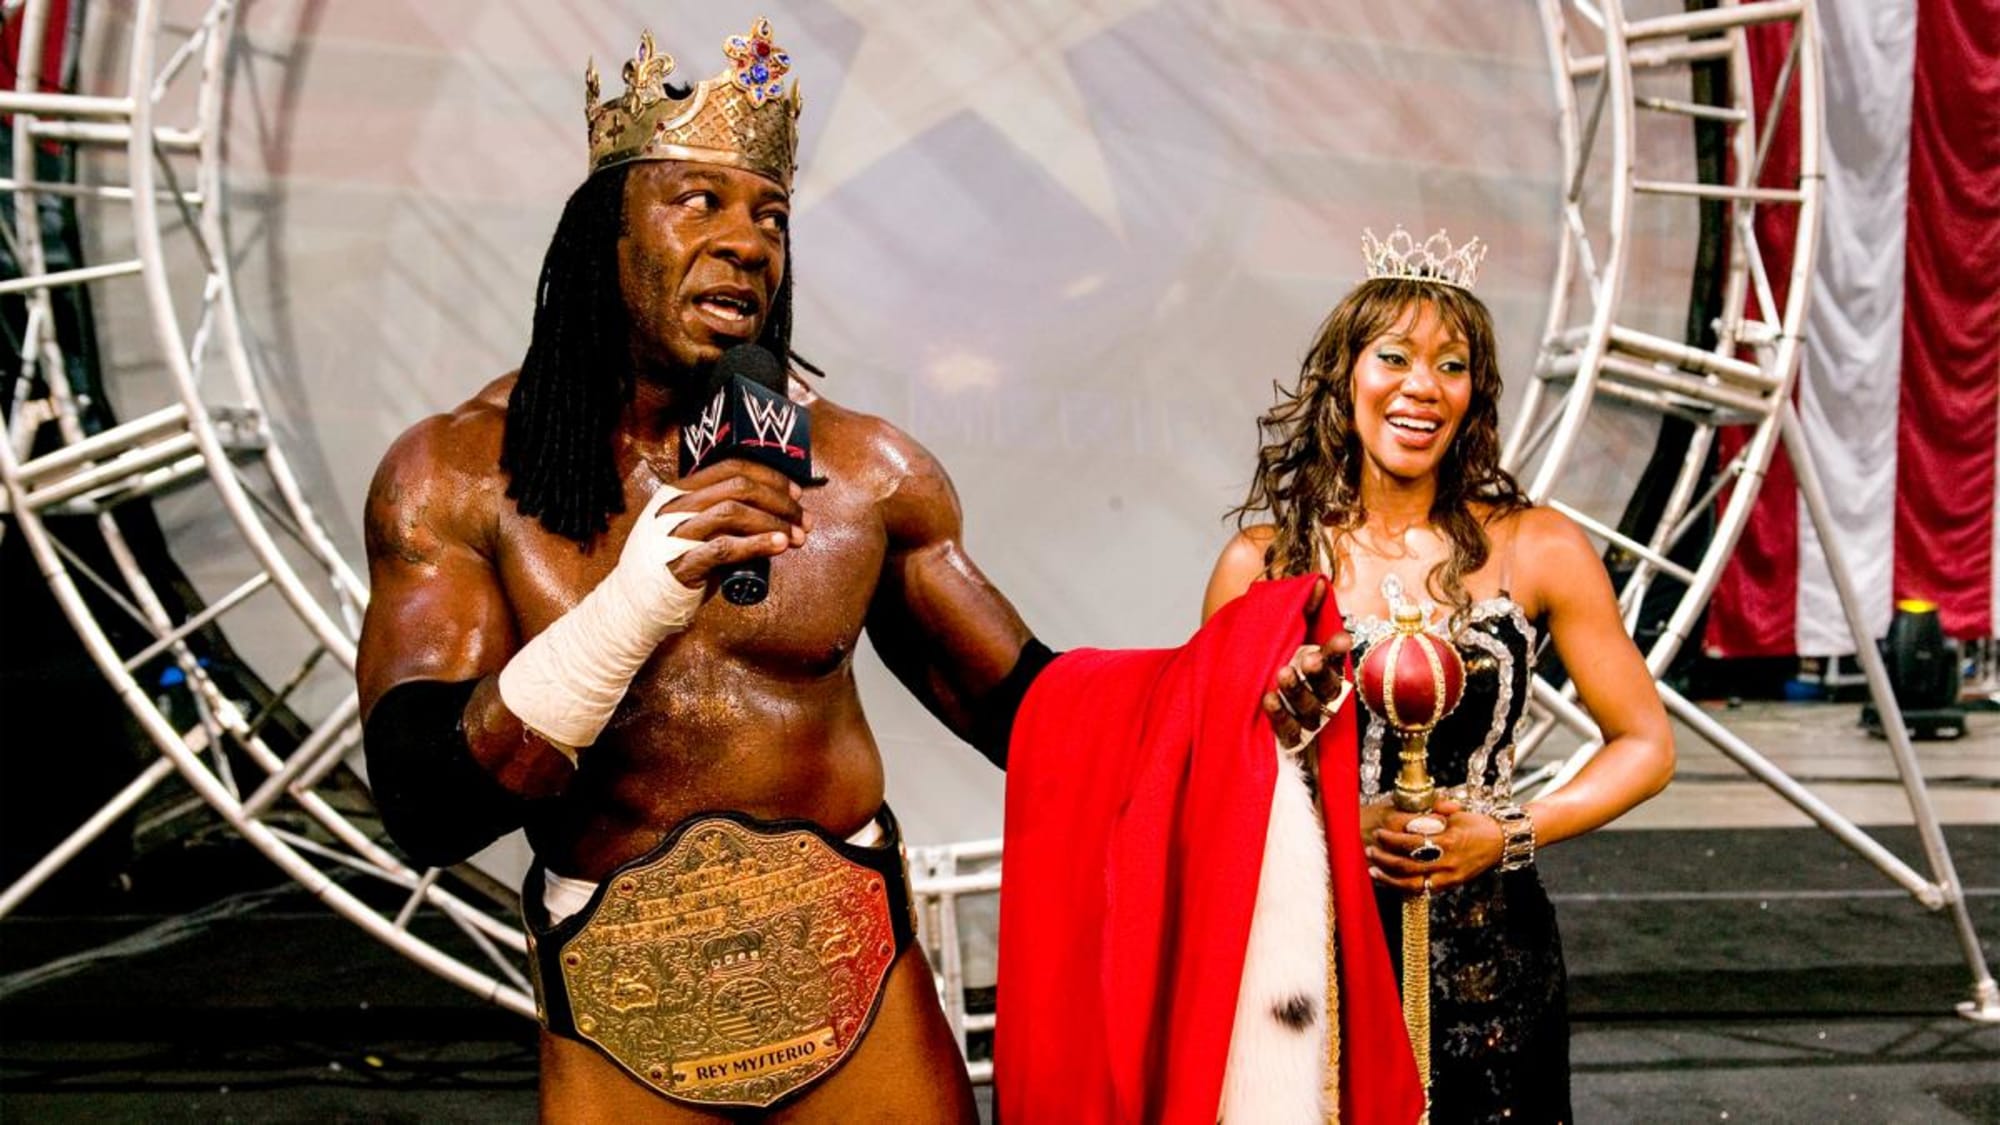 Queen Sharmell to be inducted into the WWE Hall of Fame